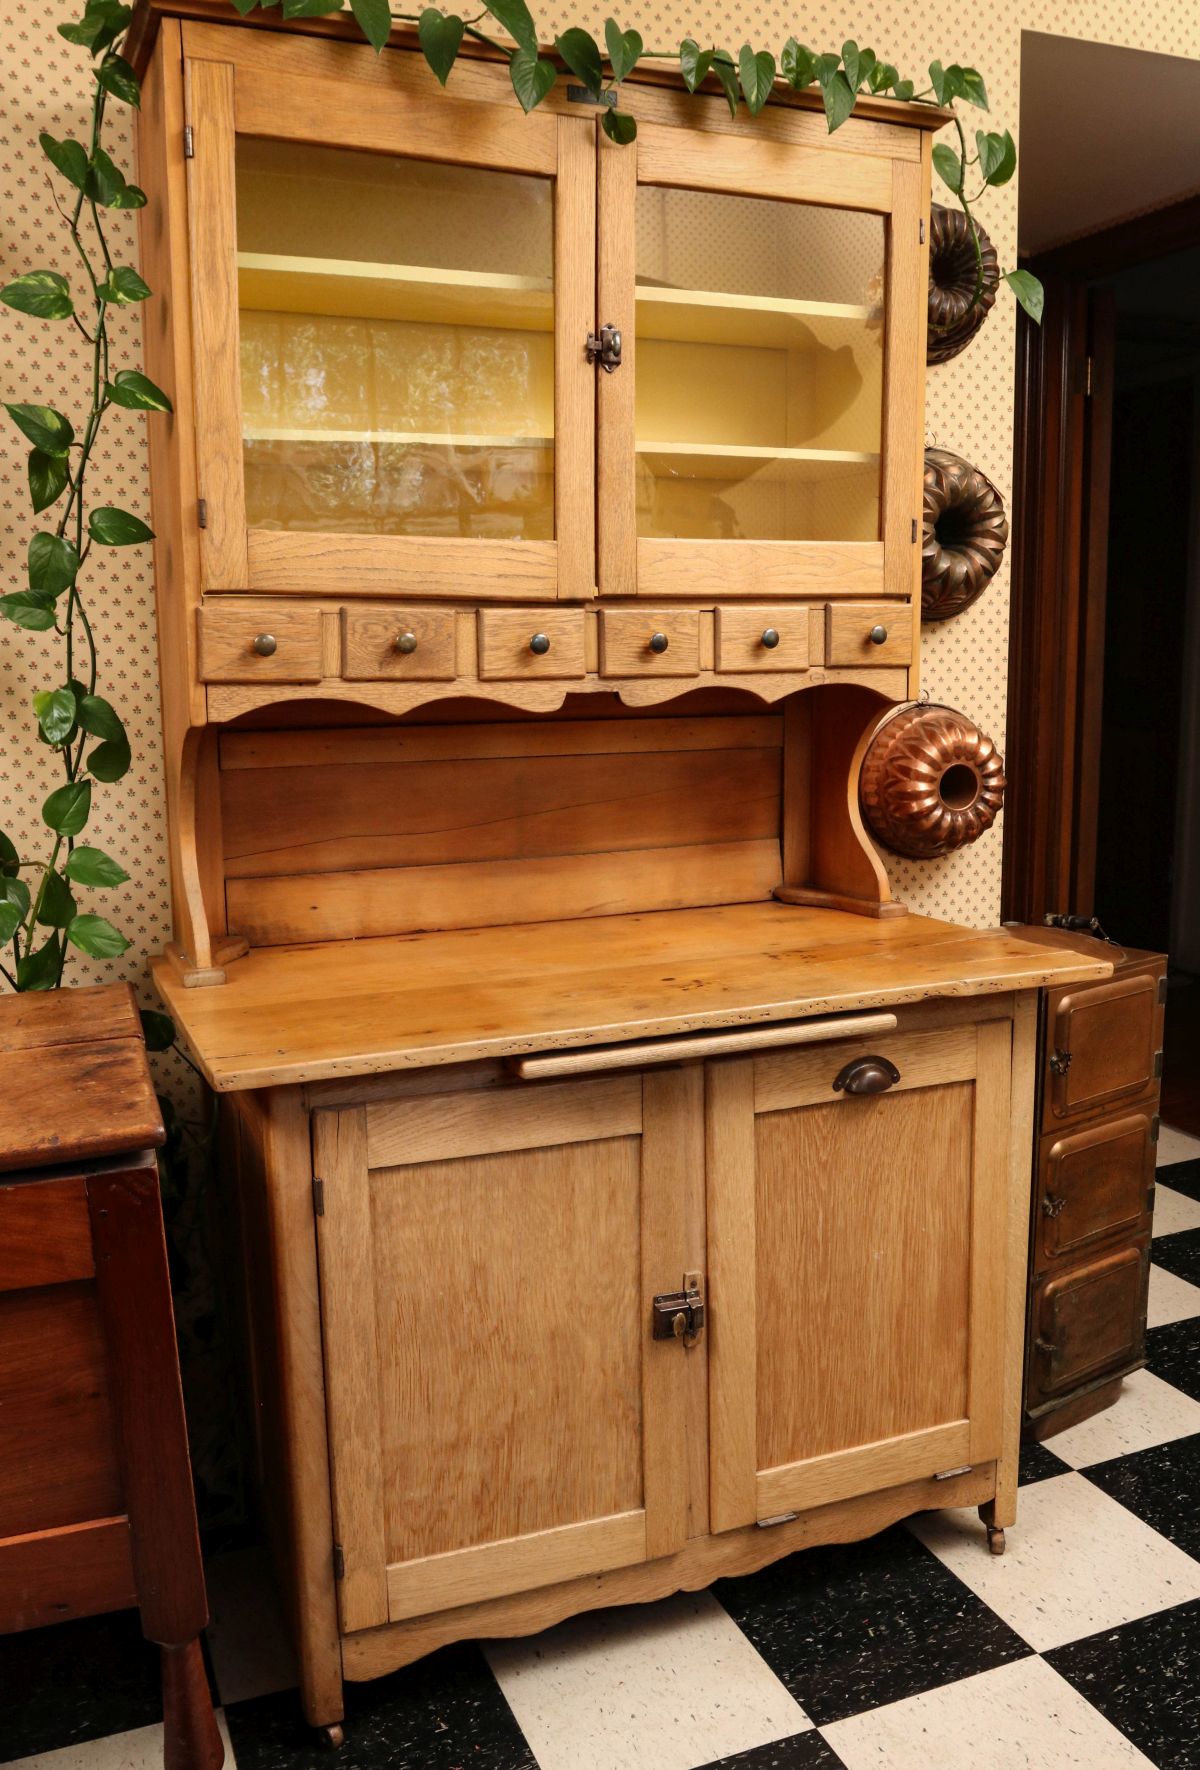 AN EARLY 20TH CENTURY ASH WOOD KITCHEN CABINET